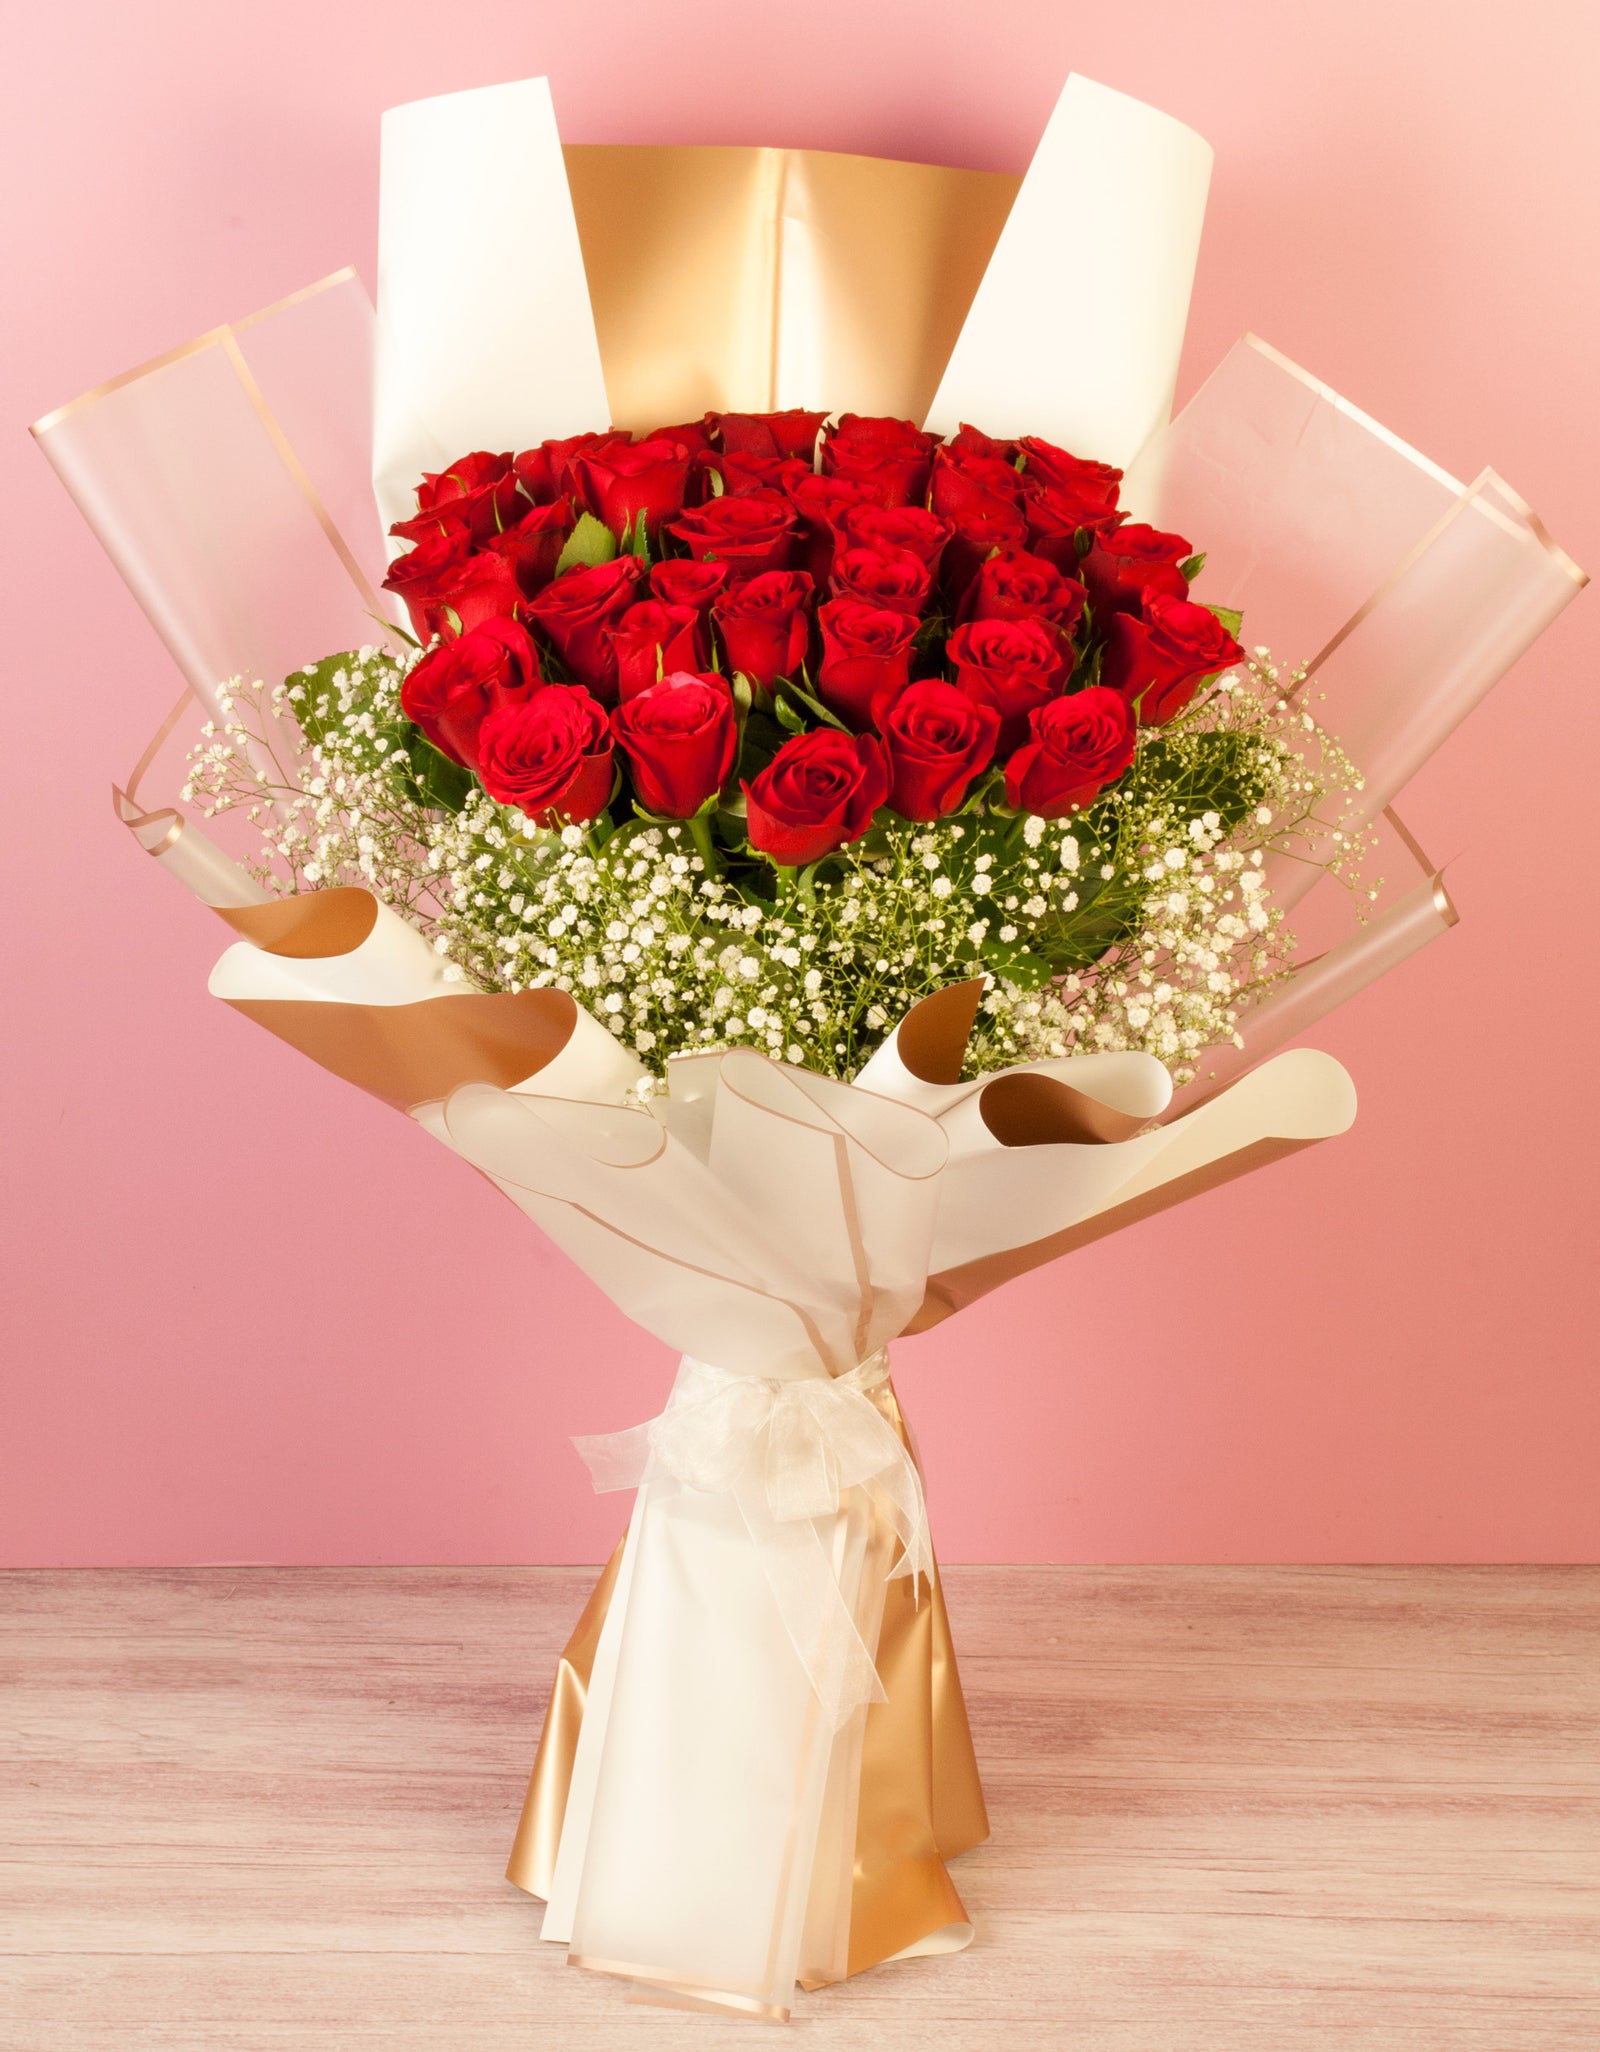 flower delivery to pune - 40 red roses hand tied